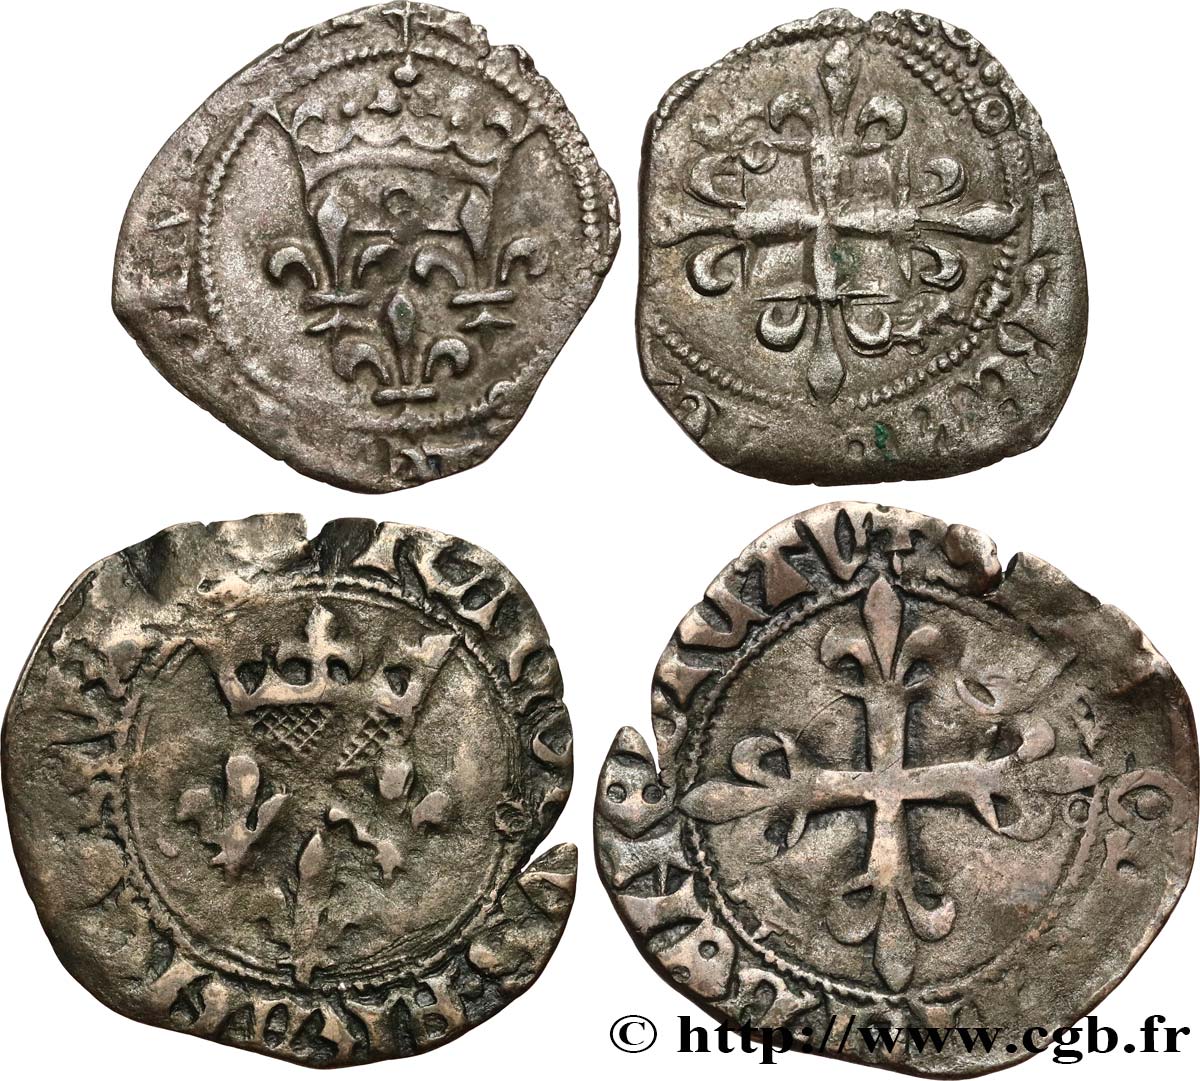 HEIR APPARENT, CHARLES, REGENCY - COINAGE IN THE NAME OF CHARLES VI Lot de 2 x gros dit  florette  n.d. Atelier divers VF